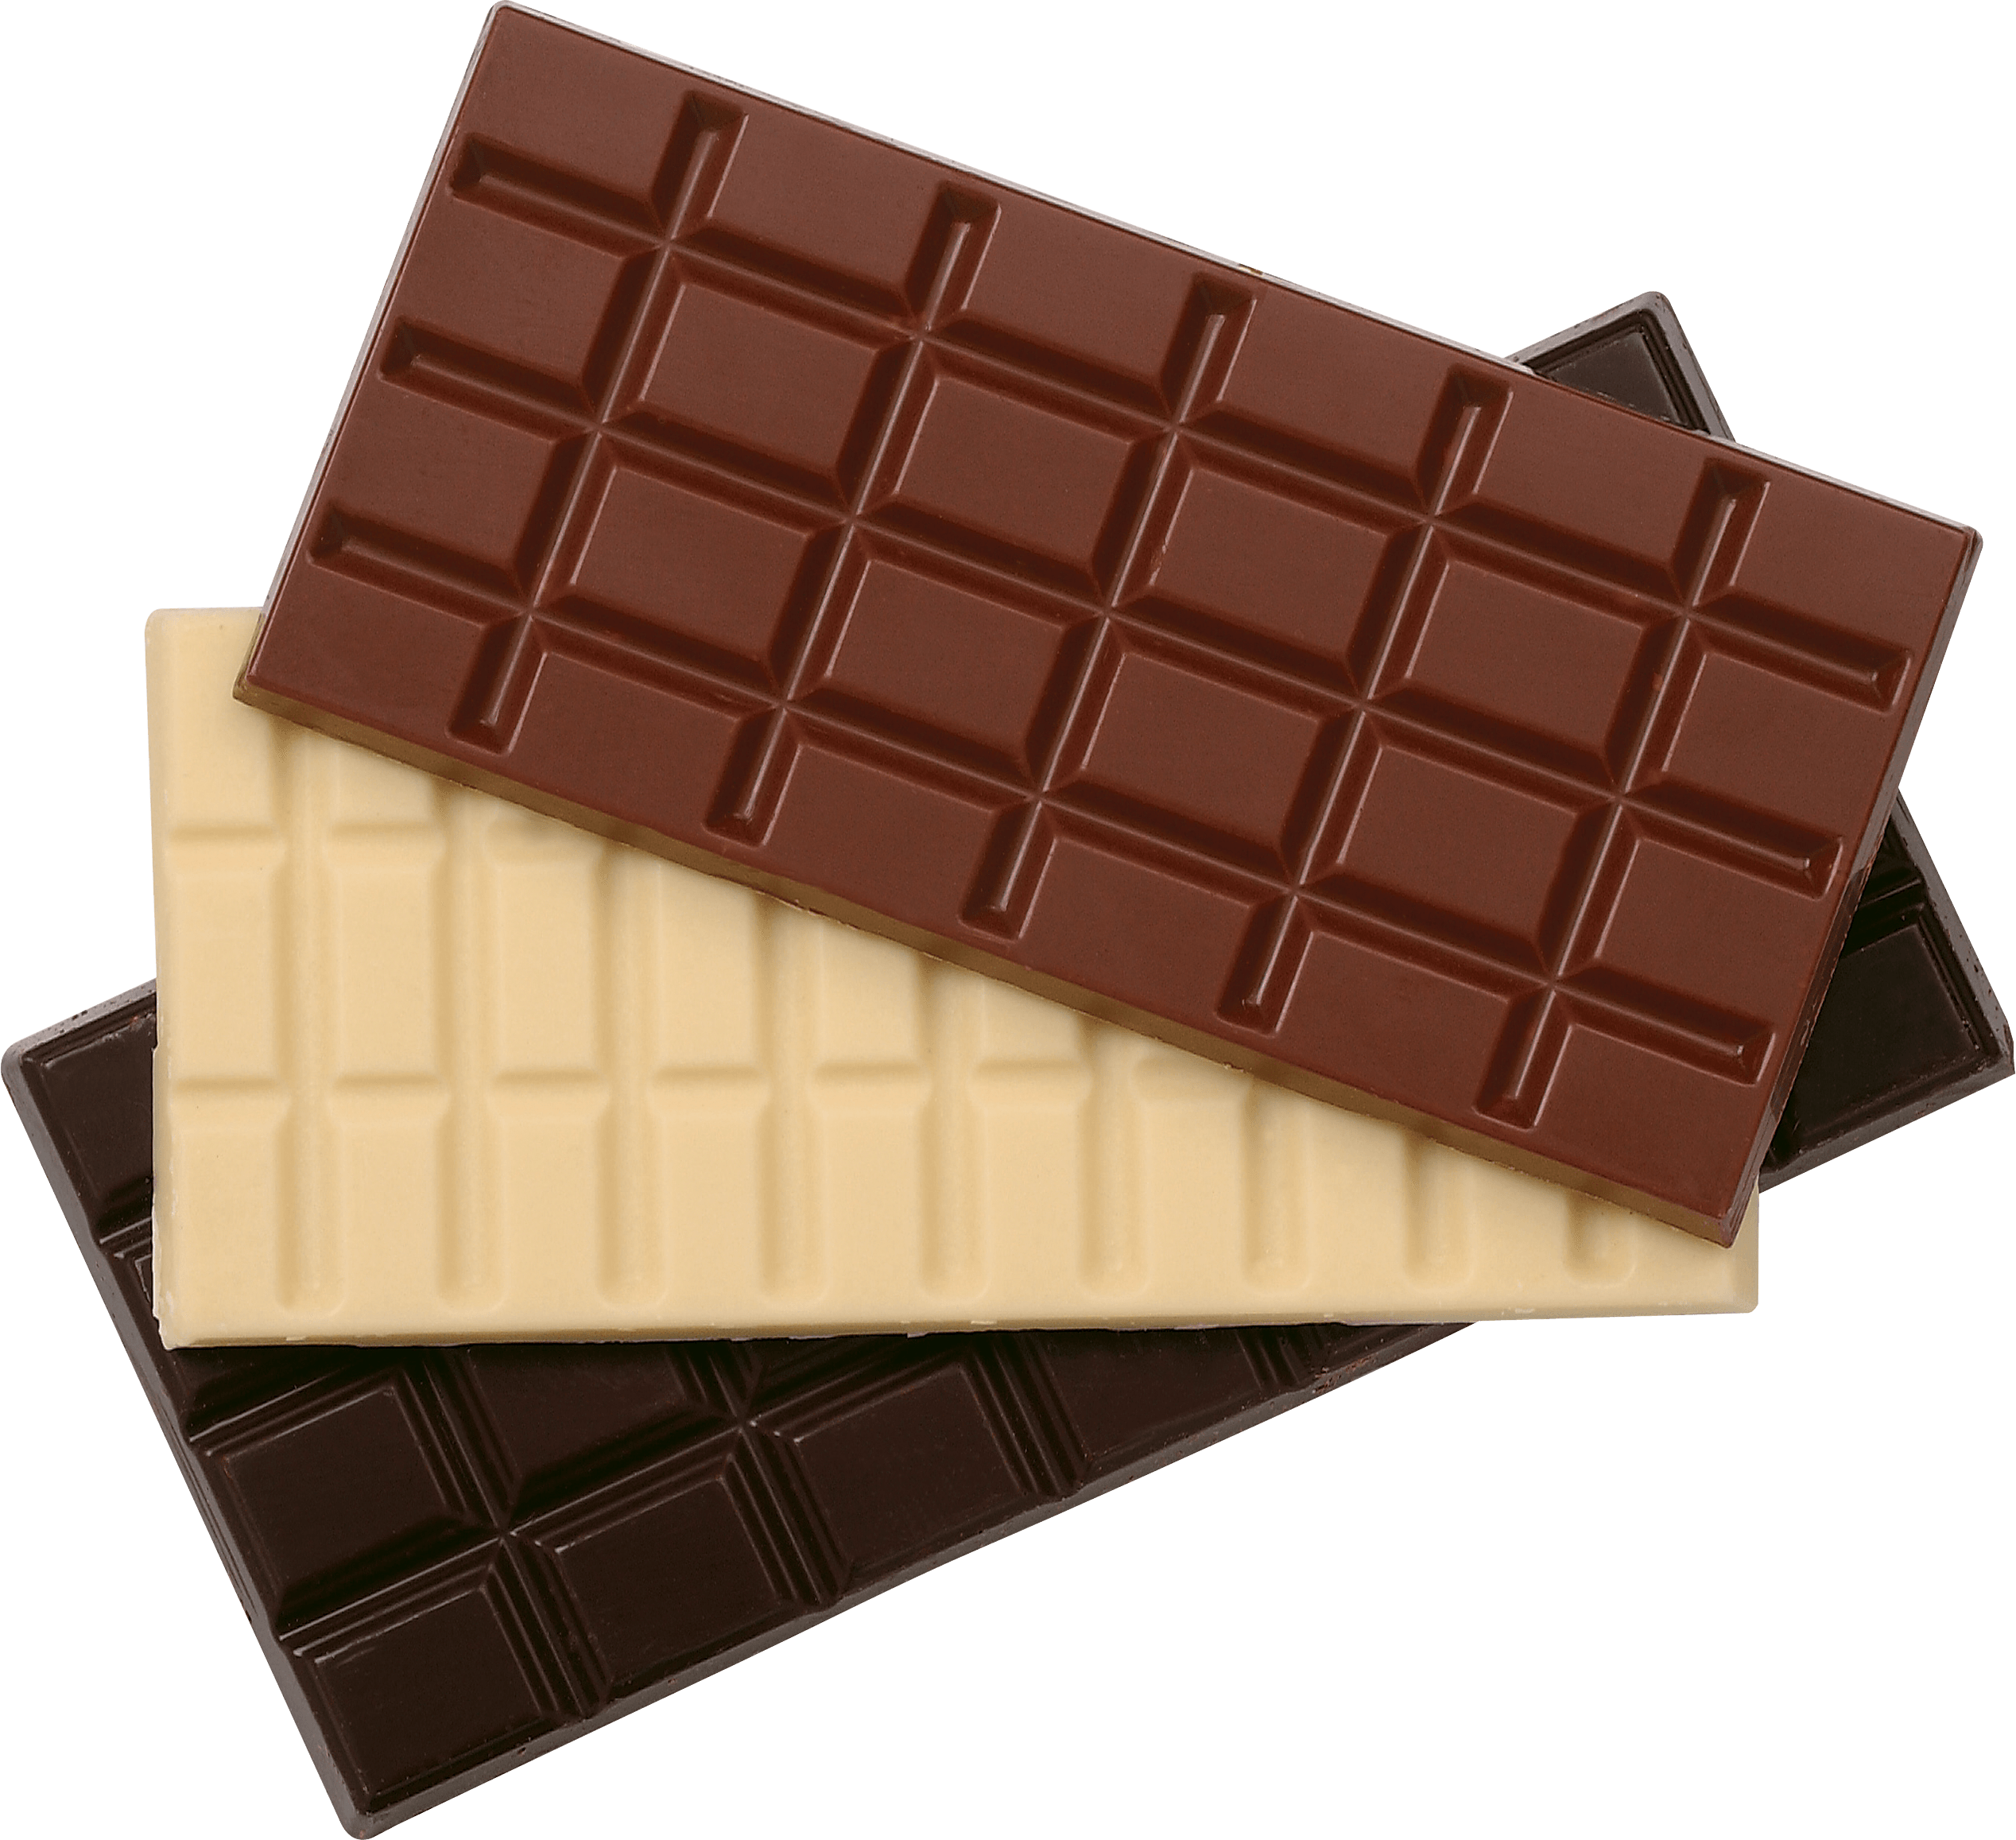 Cocoa Chocolaty Today Praline Coffee PNG